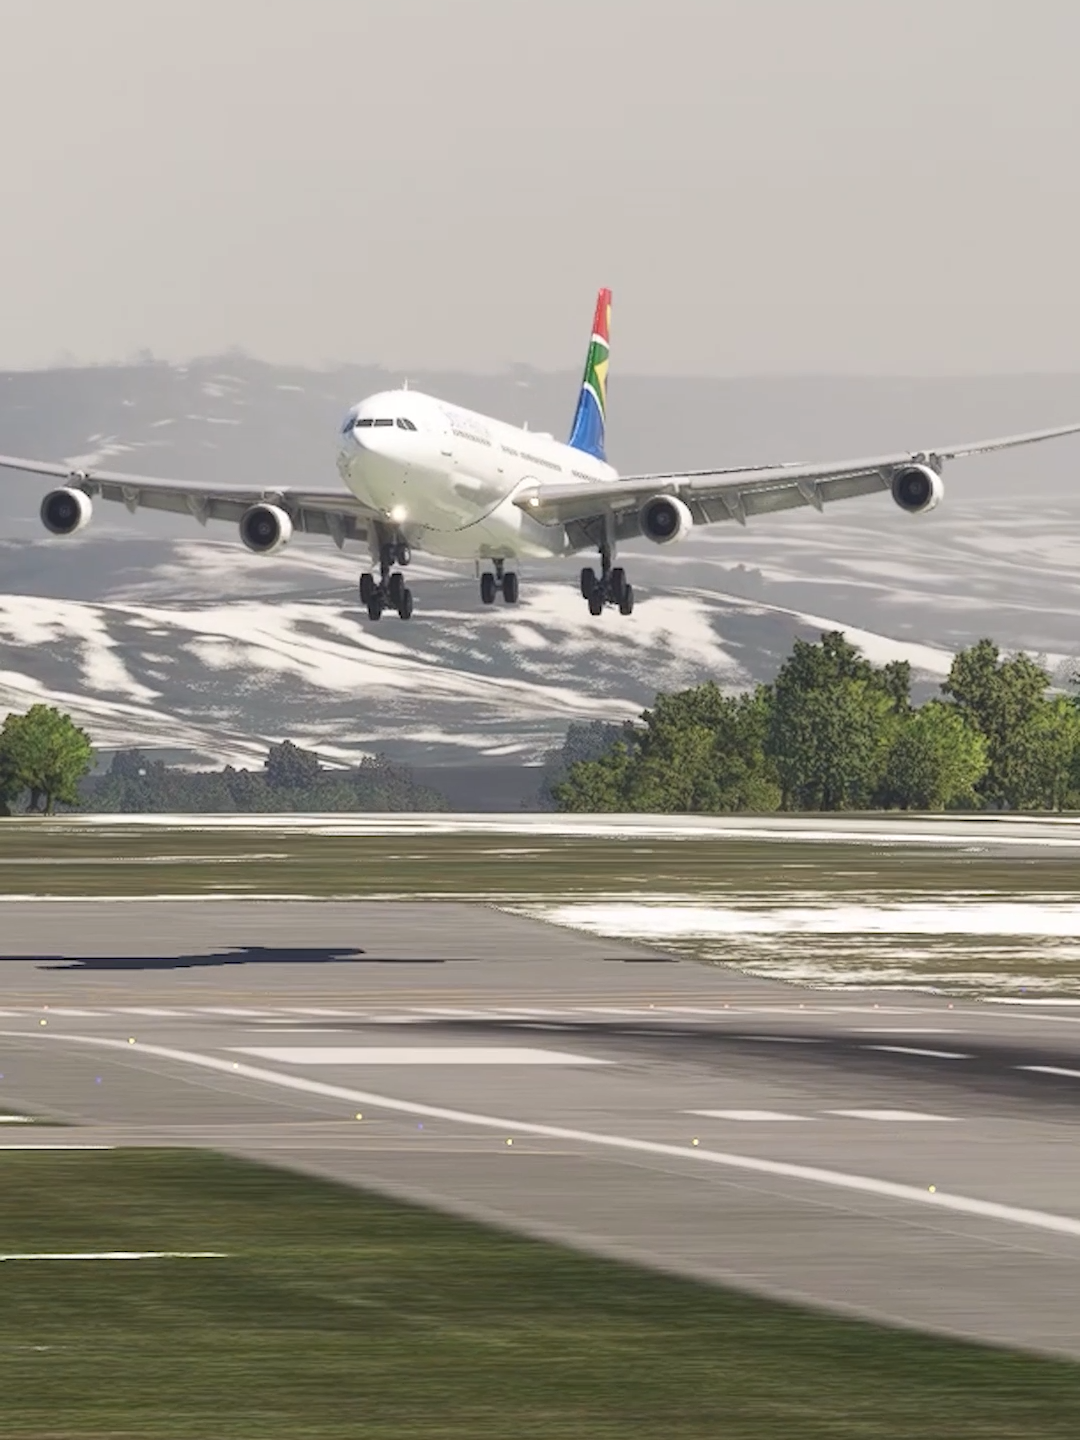 Airbus A340 face strong wind #msfs2020#a340 #airbusa380  #aviation #airlines #boeing  #a320 #airbus #aircrash #airplane #landing #msfs #microsoftflightsimulator #flight #flightsimulator #boeing #crosswindlanding #strongwind #crosswindlanding #pilot #aircrash #airbus